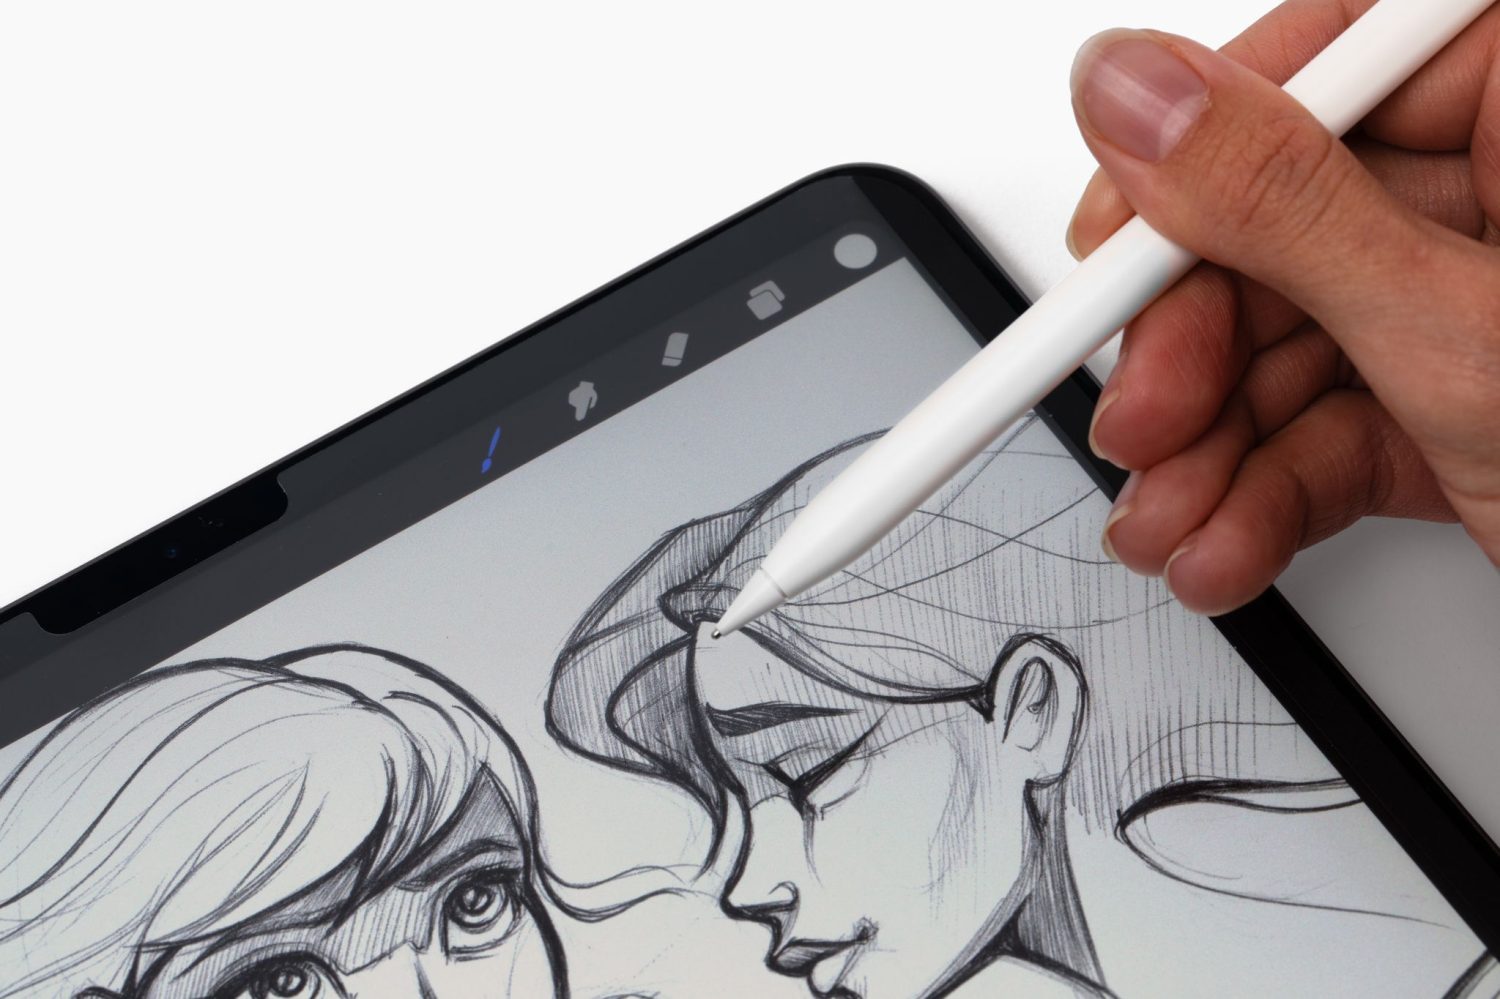 Astropad launches pen-on-paper upgrade for iPad with 'Rock Paper